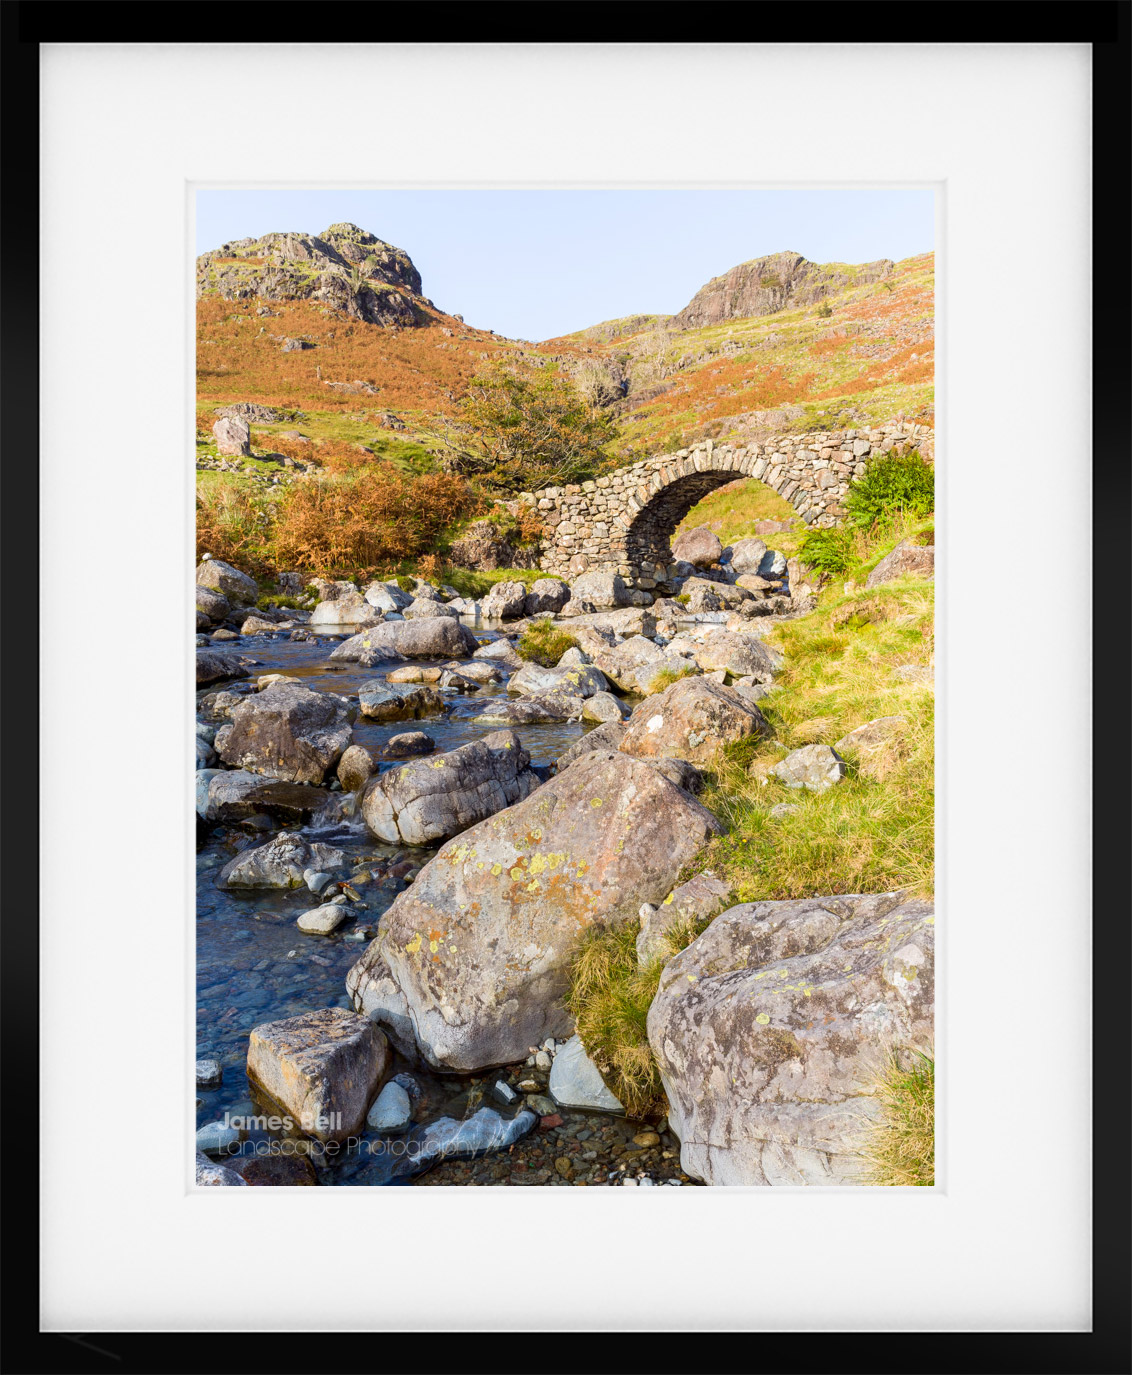 Photographing the lake district with the cambo actus-xcd